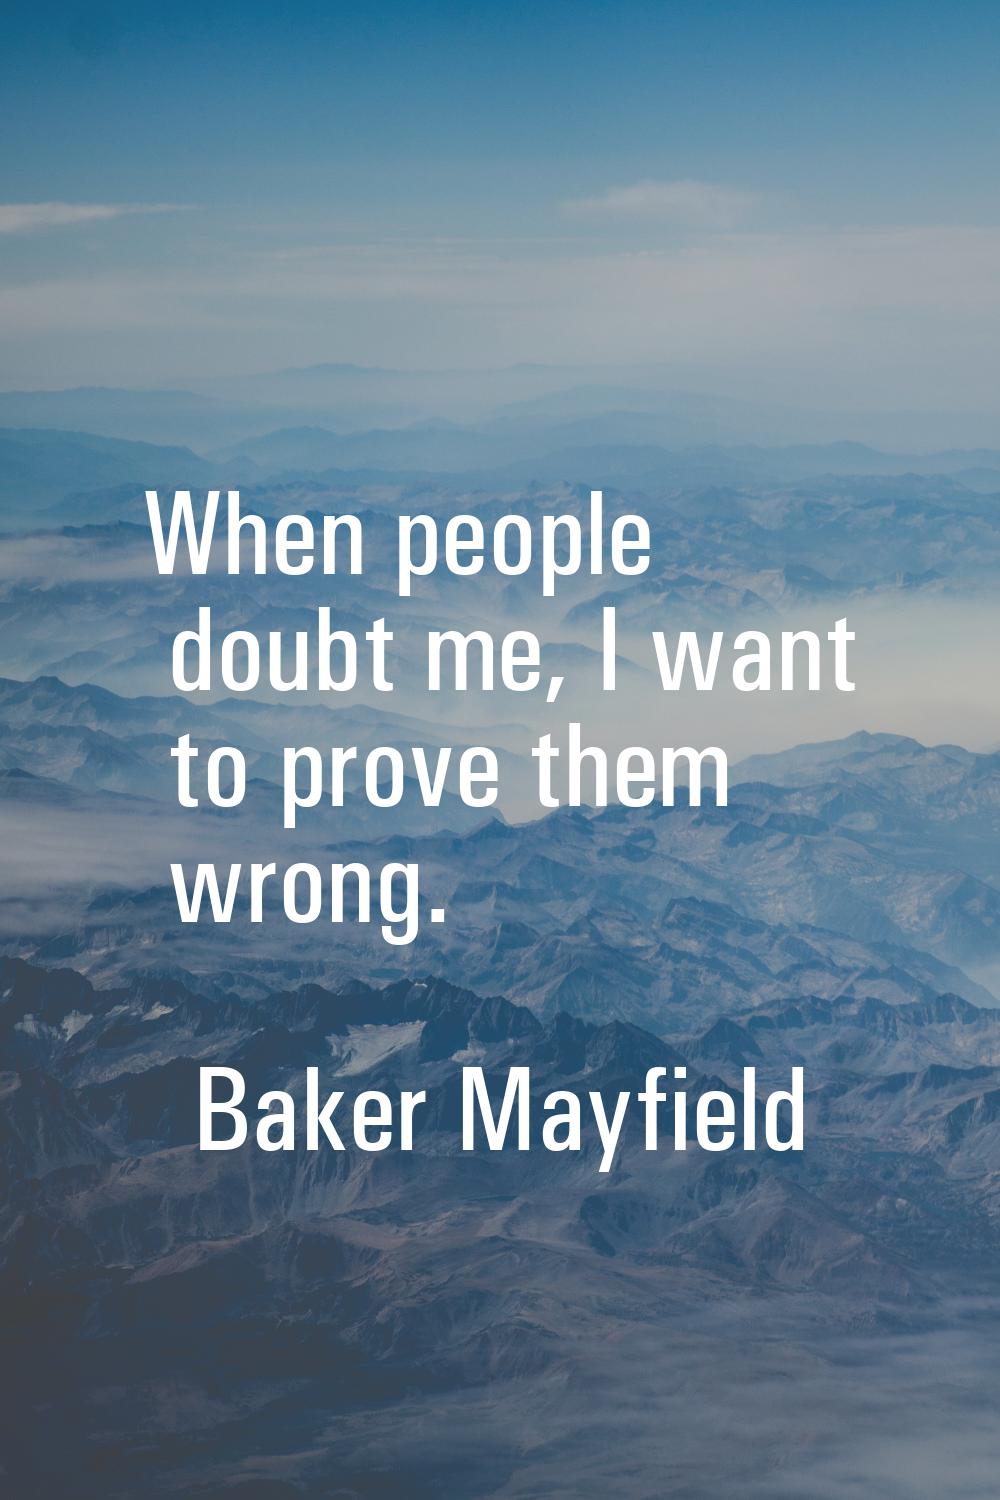 When people doubt me, I want to prove them wrong.